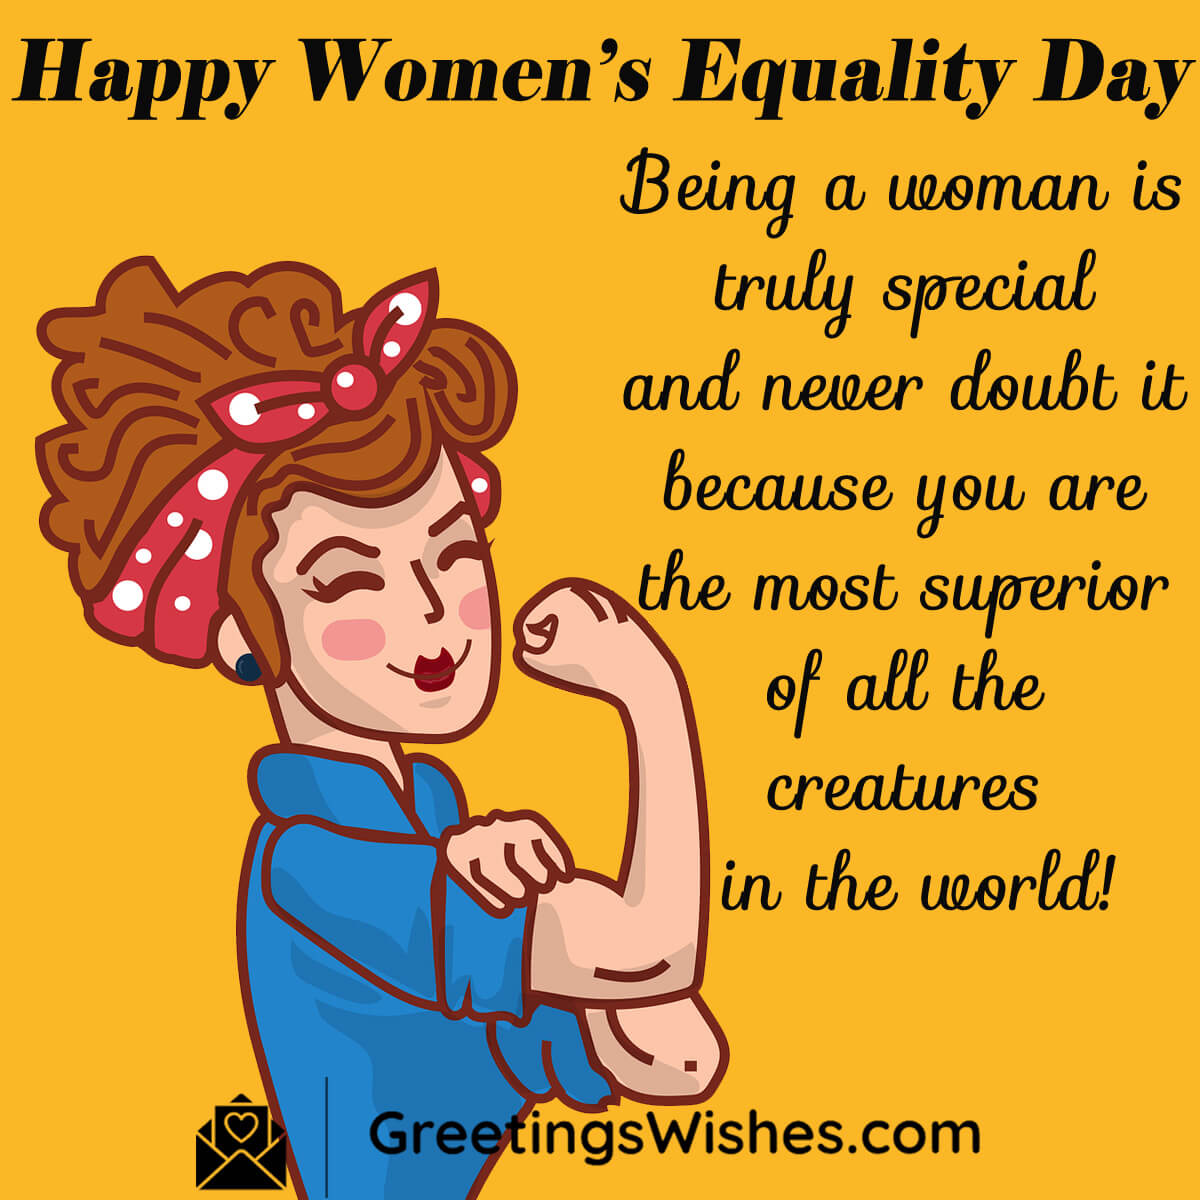 Women's Equality Day Wishes